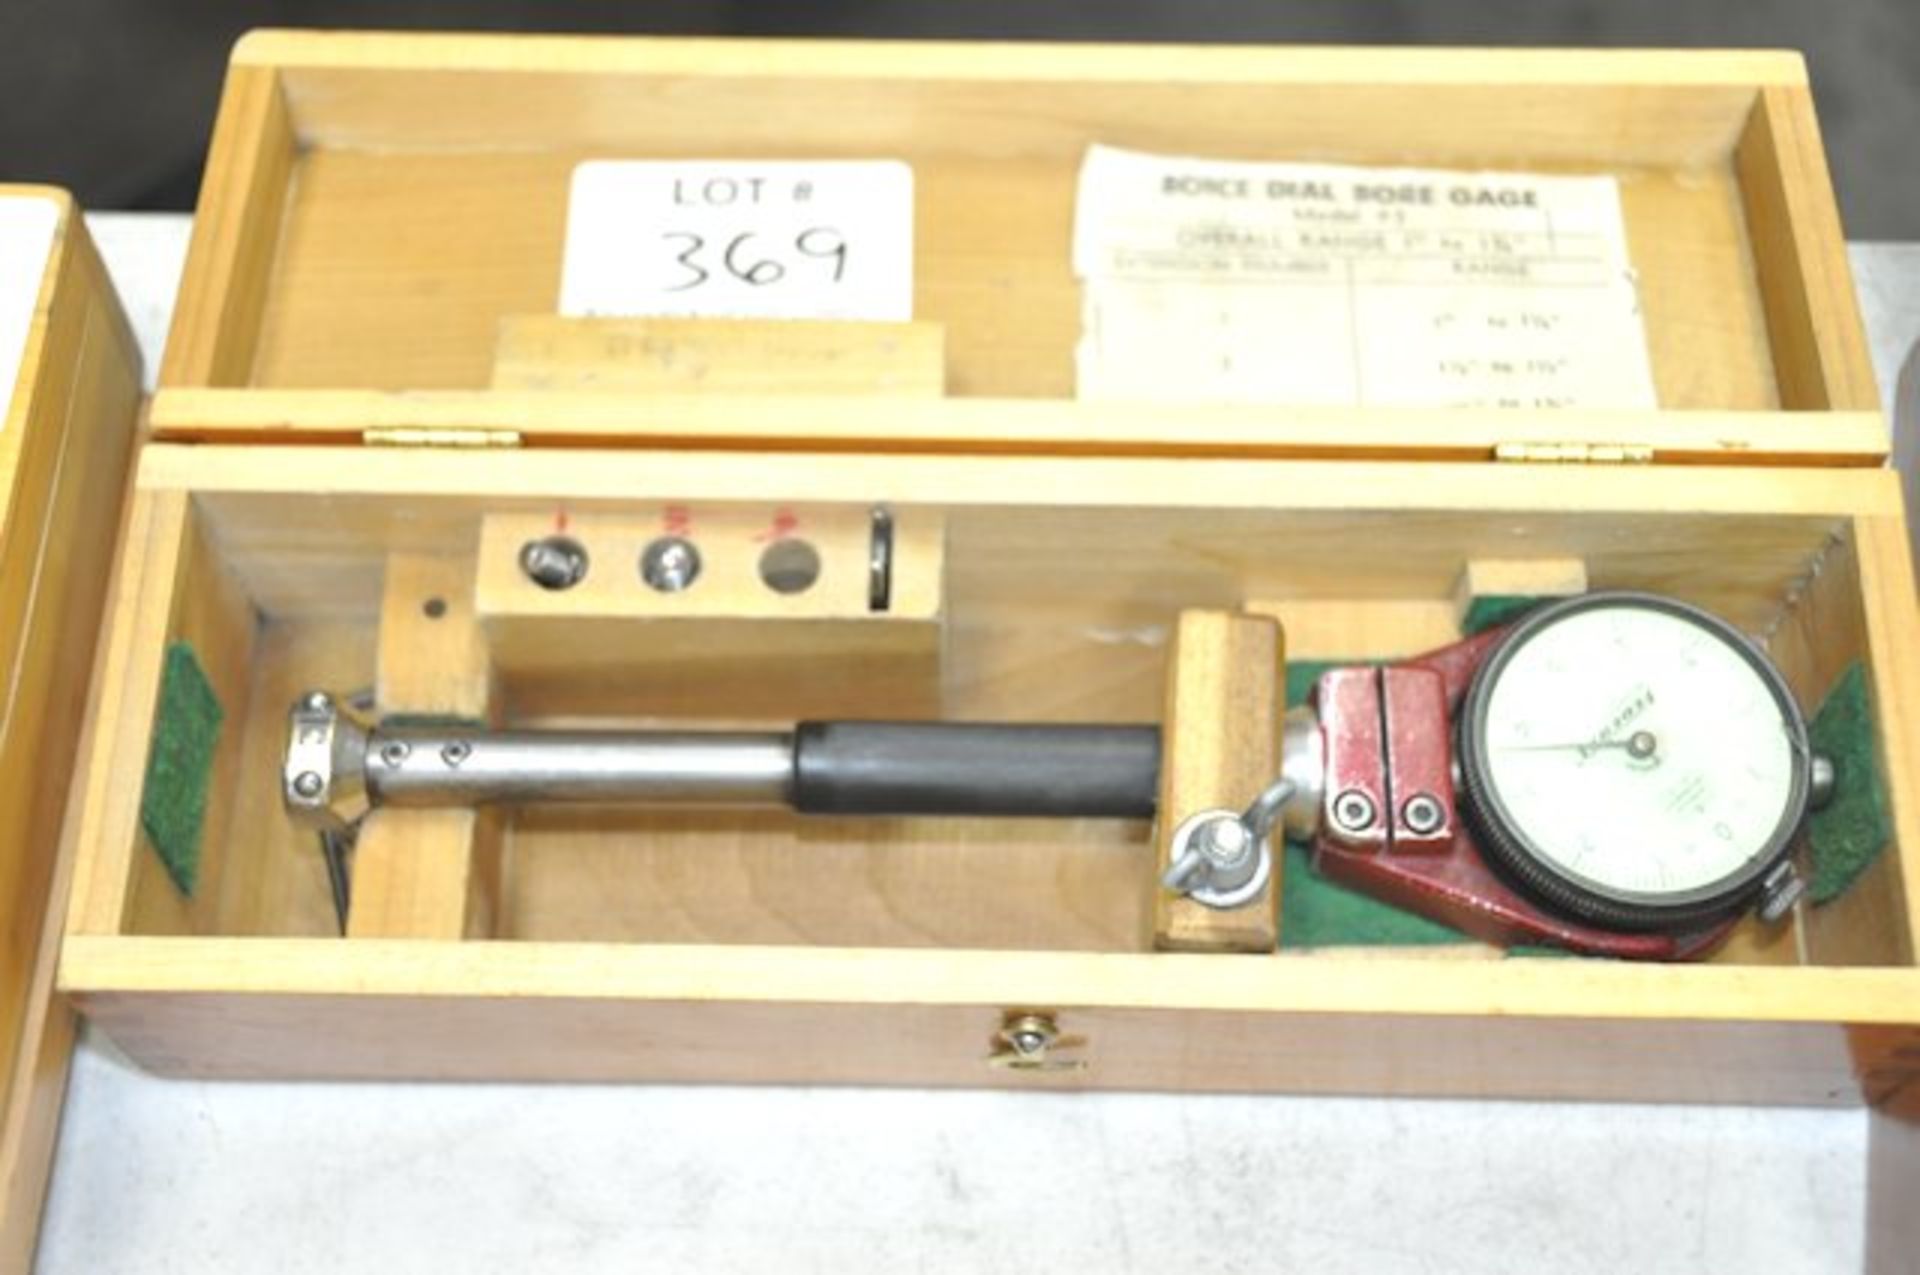 BOICE Carbide Tipped Bore Gage with Federal Dial Indicator and Case